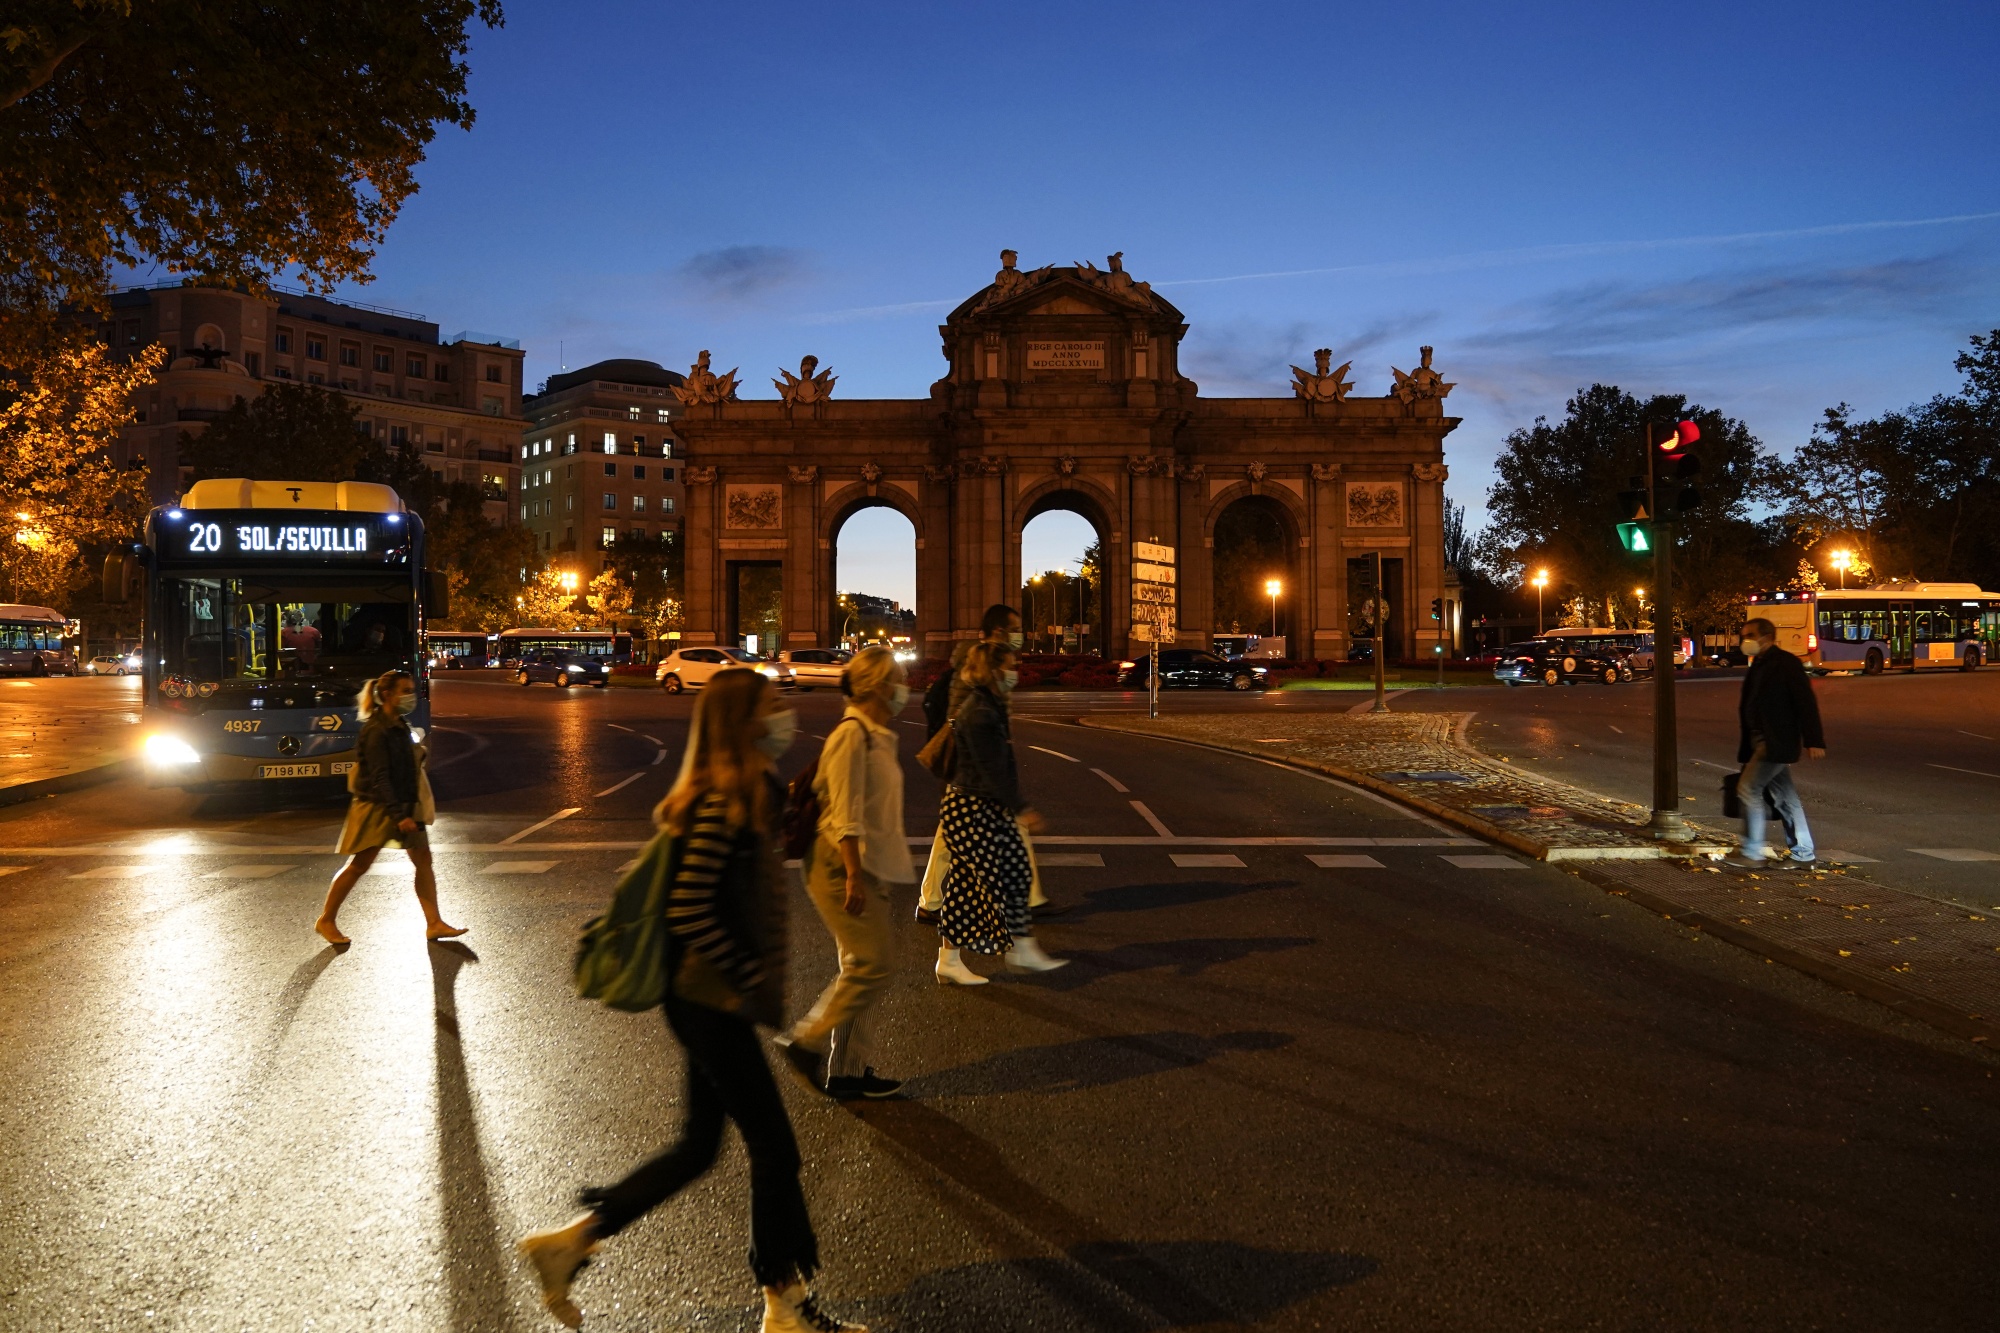 Morning commuters cross&nbsp;in front of the Puerta de Alcala monument in Madrid, Spain.